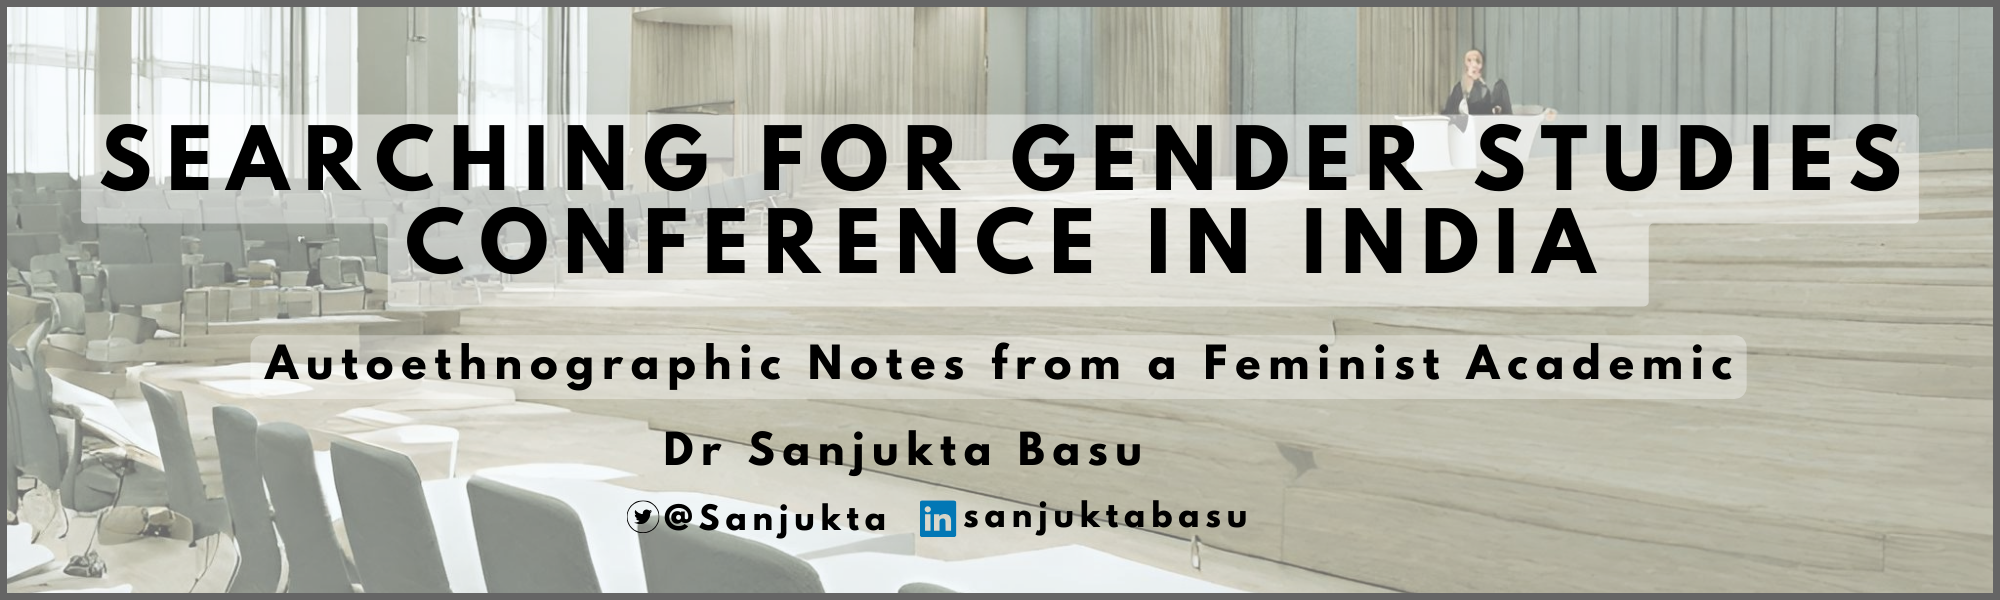 Search for Women’s and Gender Studies Conference In India: Autoethnographic Notes from a Feminist Academic